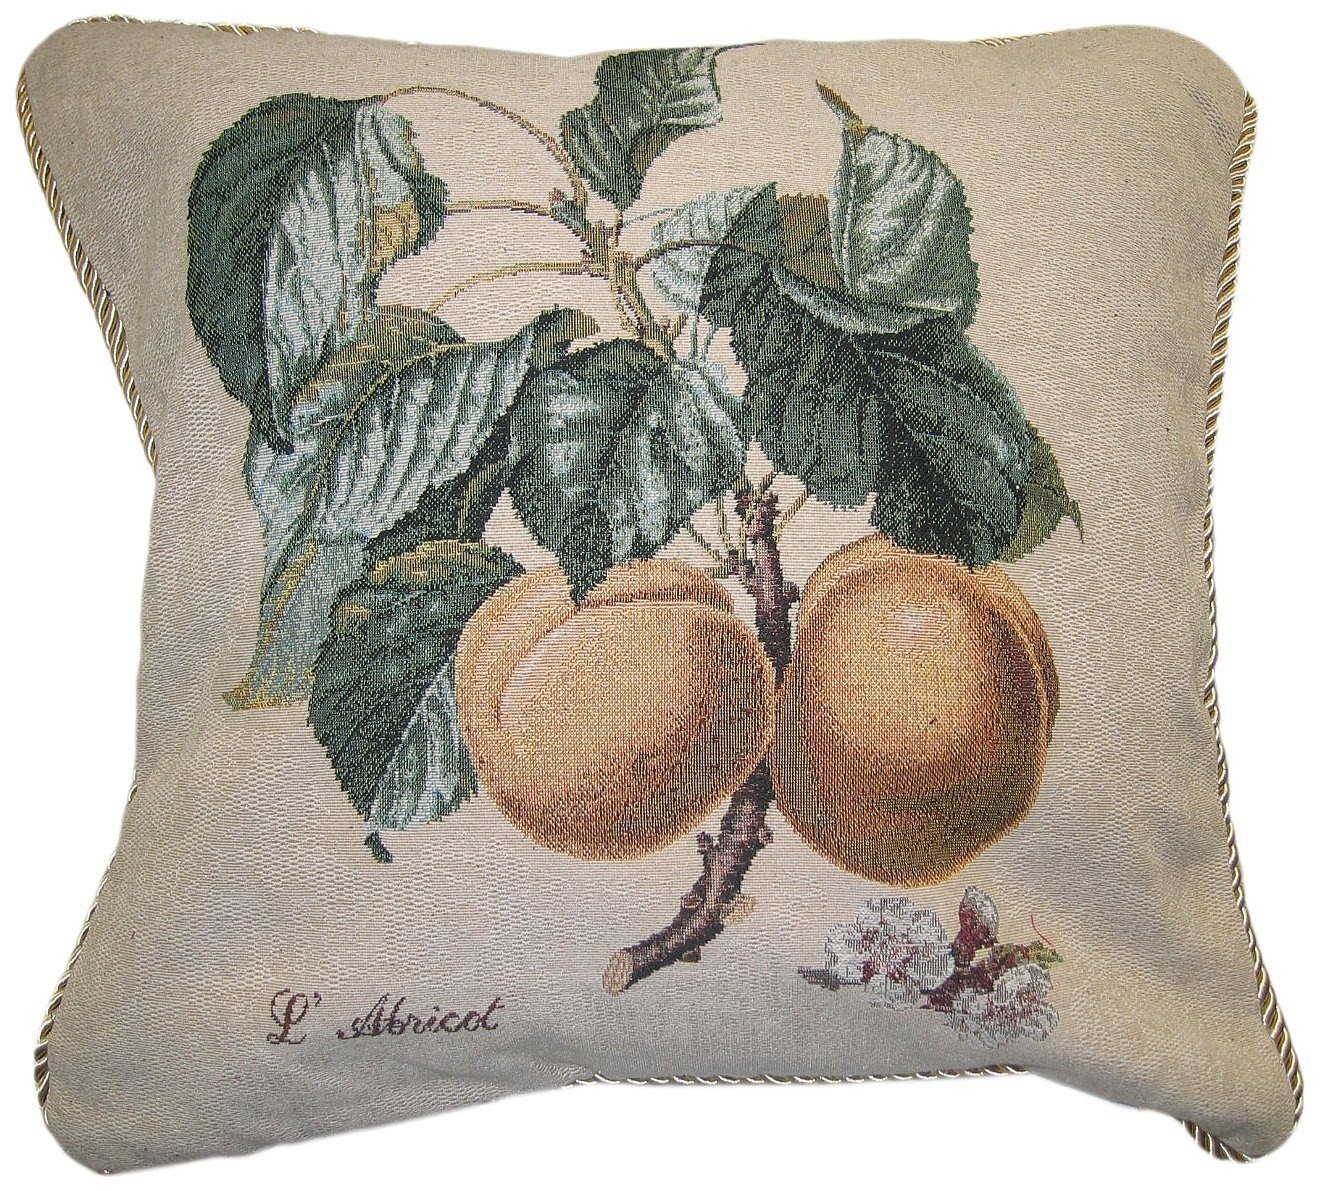 Apricot Fruit Elegant Novelty Woven Square Accent Cushion Cover Throw Toss Pillow Case -  1-Piece - 18" - Stores Basement - Discount Bedding